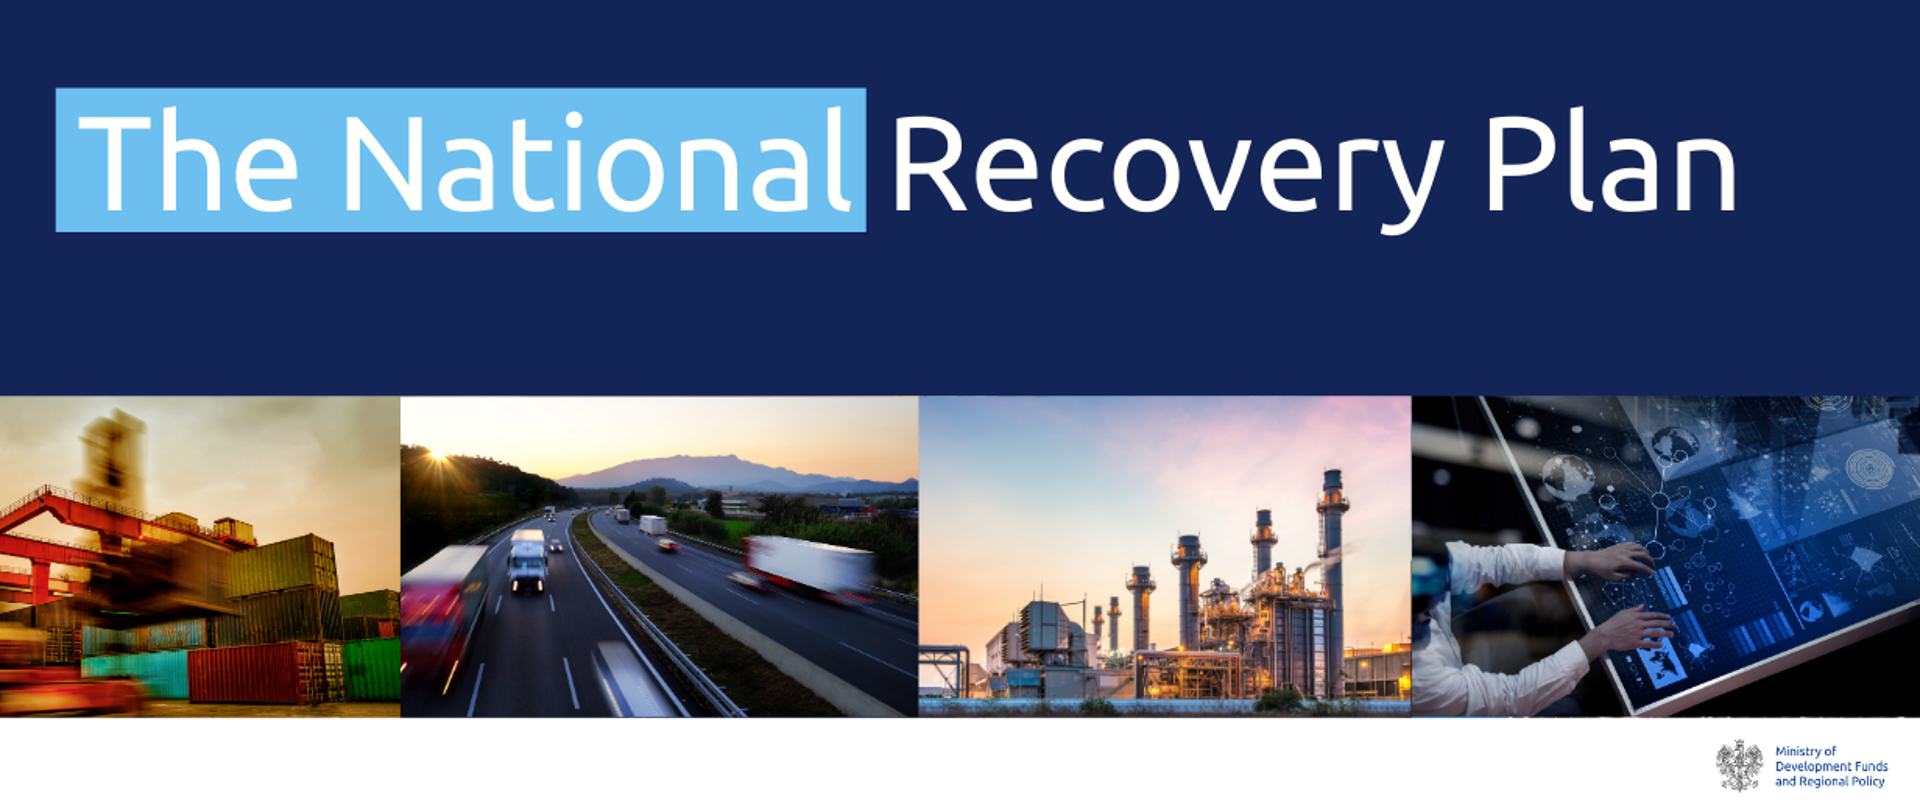 The National Recovery Plan